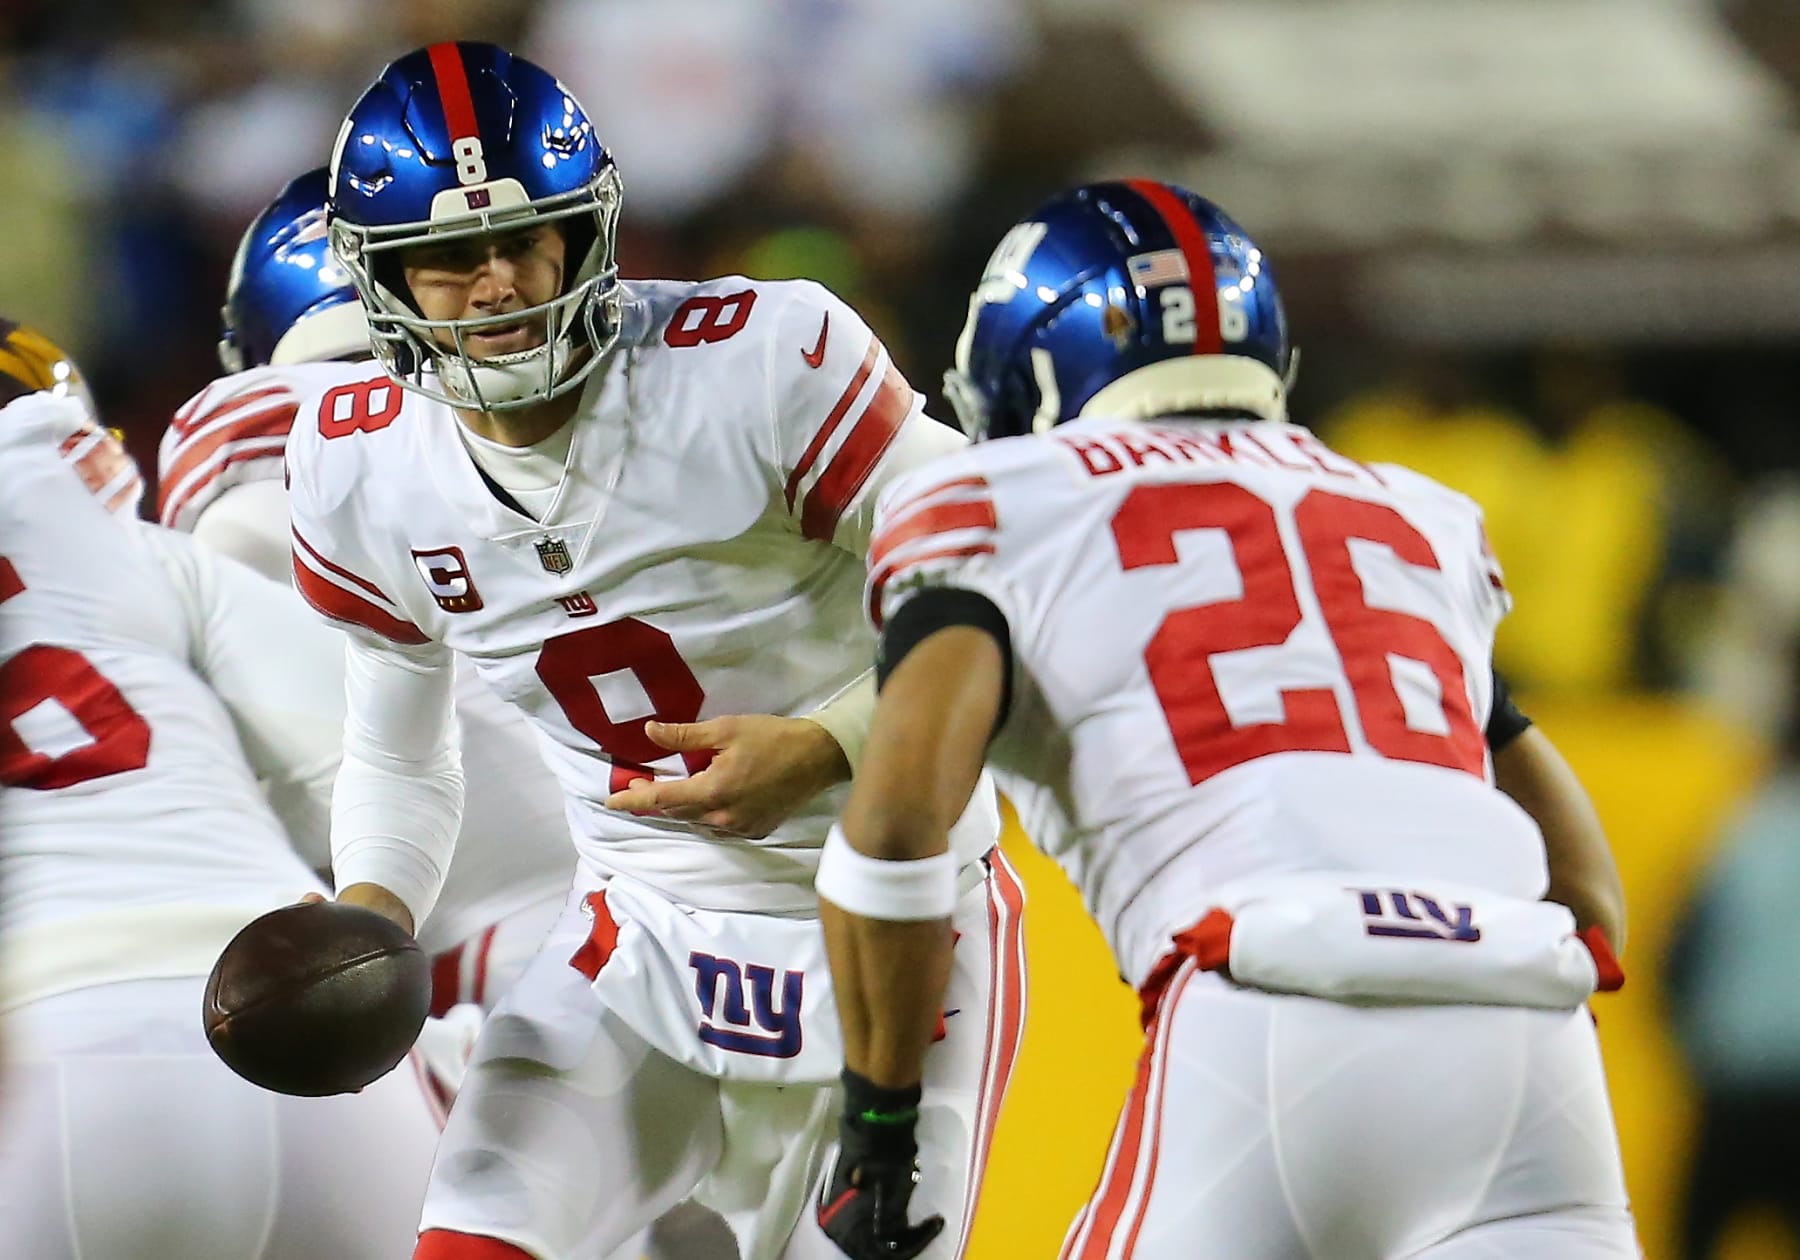 Cover 3: Comparing new eras for Giants, Knicks